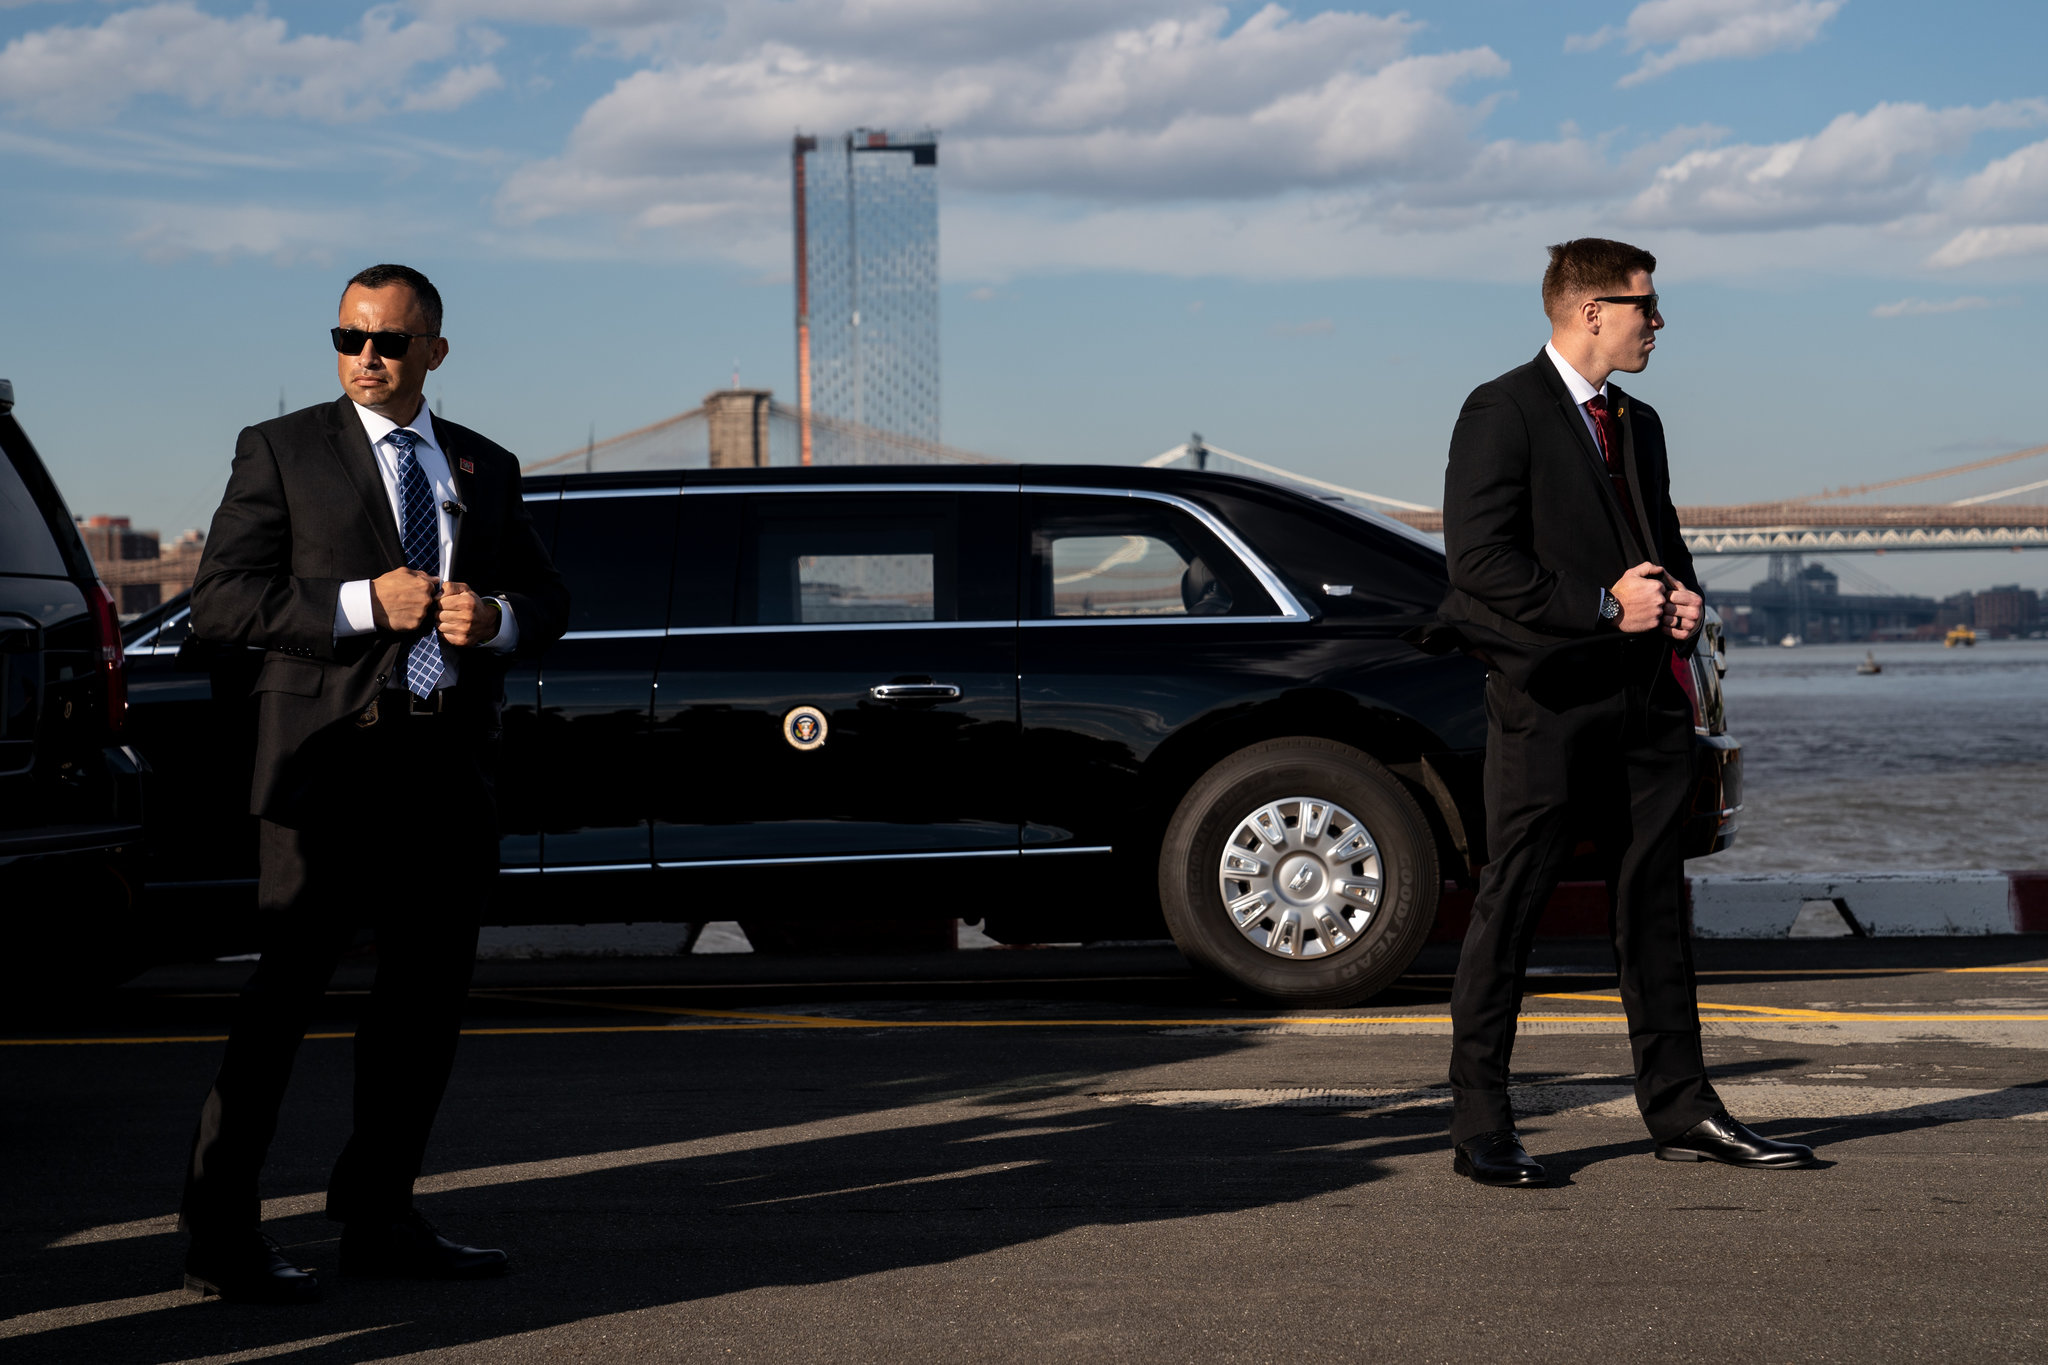 The Hidden Role of the US Secret Service in Undermining Sound Money